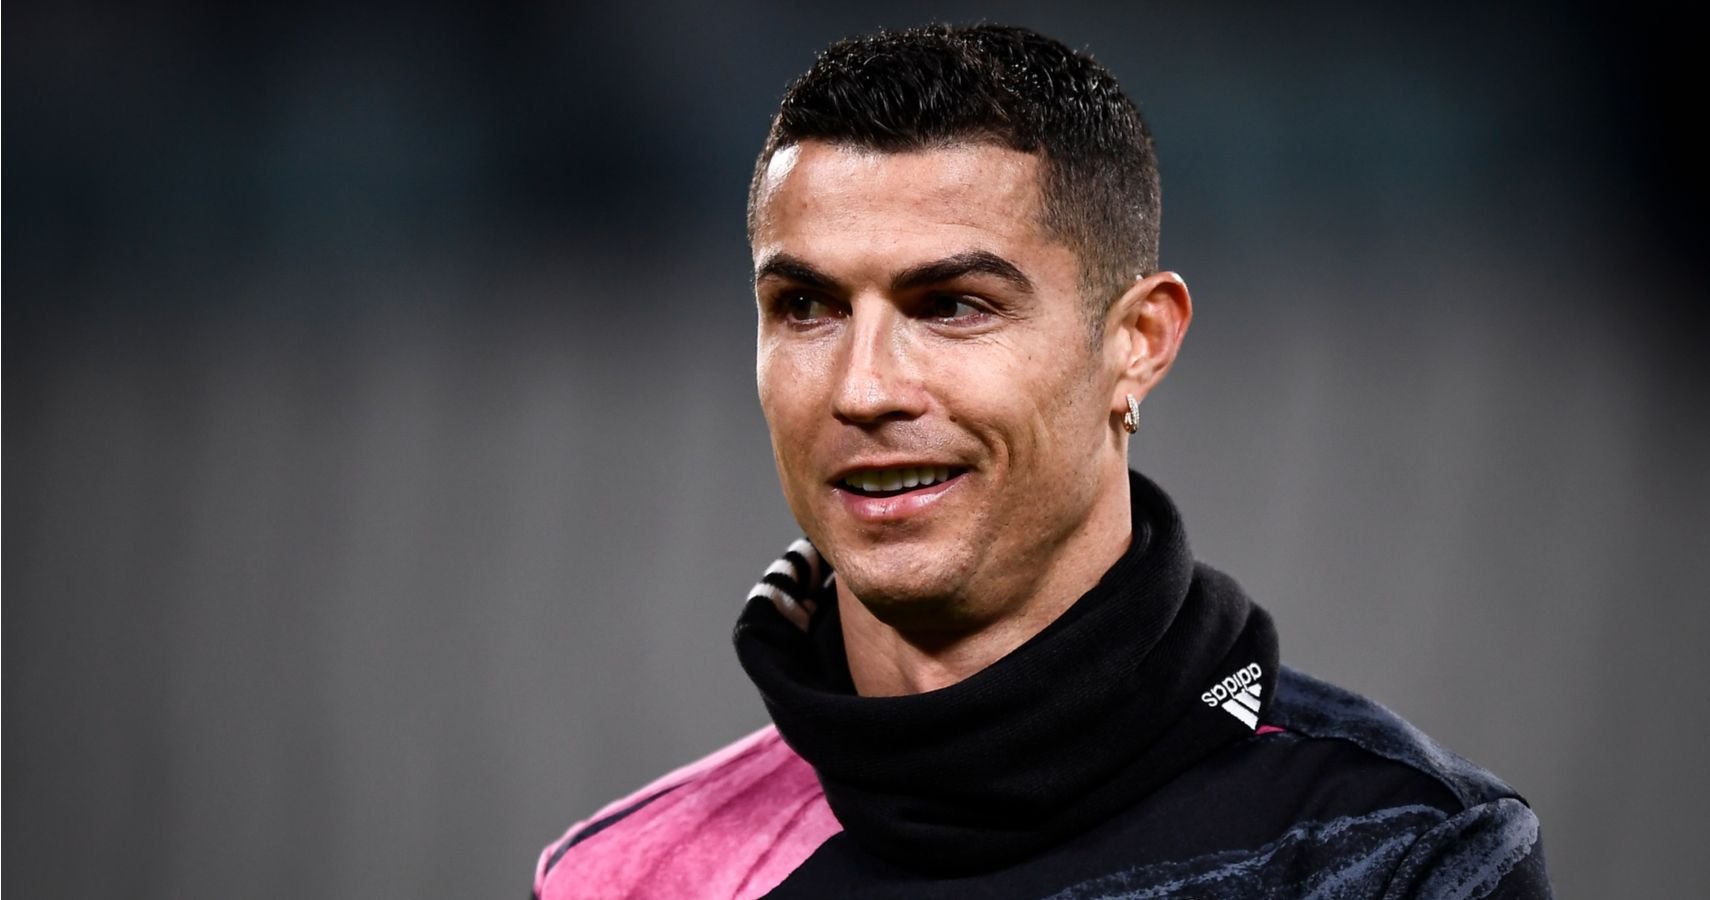 Check Out Cristiano 'GOAT' Ronaldo's Crazy Expensive Watch Collection